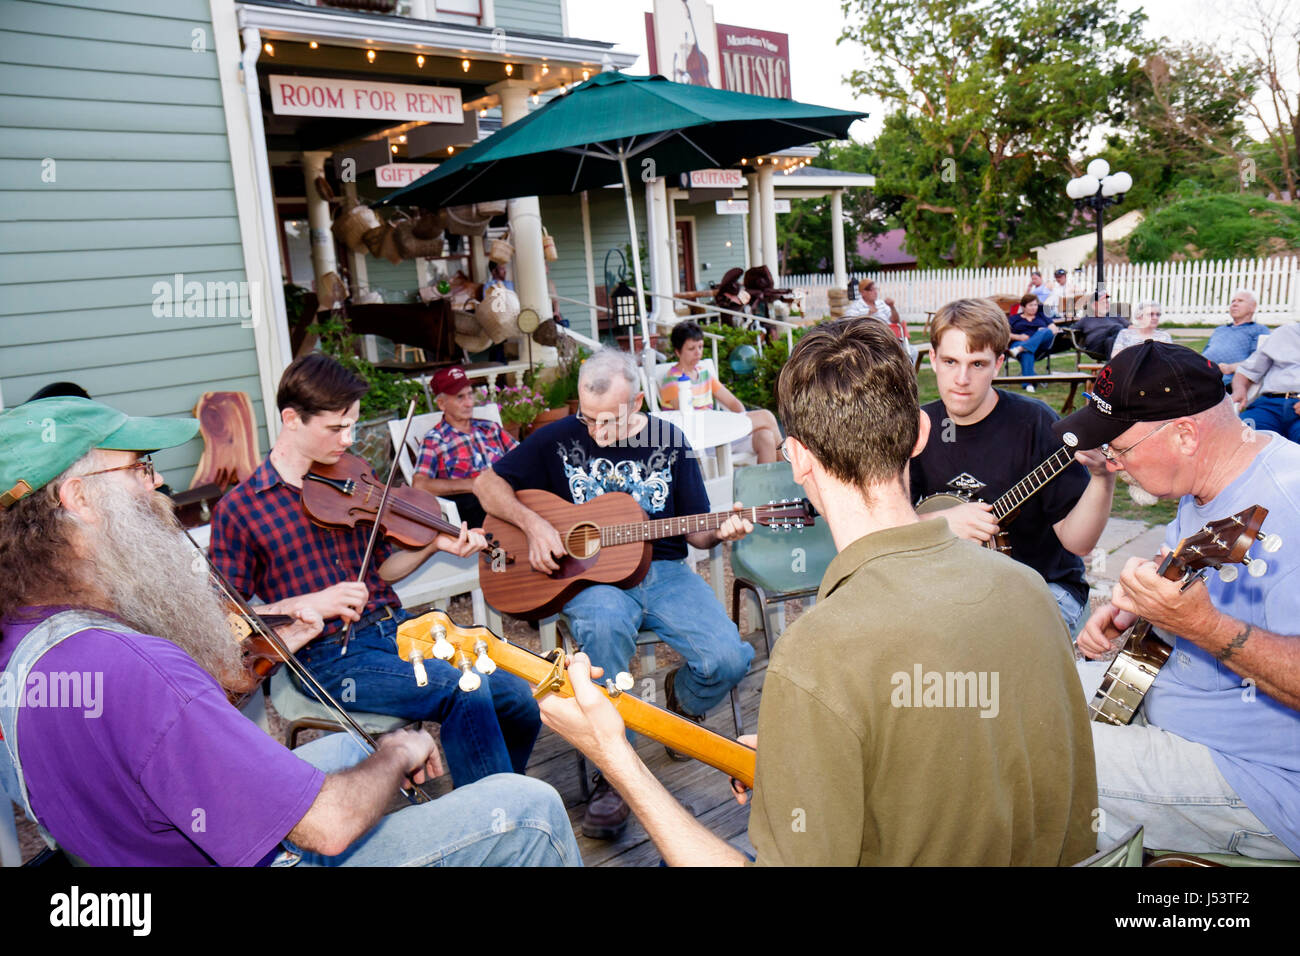 Arkansas Ozark Mountains, Stone County, Mountain View, Folk Music Capital of the World, musicien rassemblement, homme hommes hommes, adolescents adolescents adolescents adolescents étudiant Banque D'Images